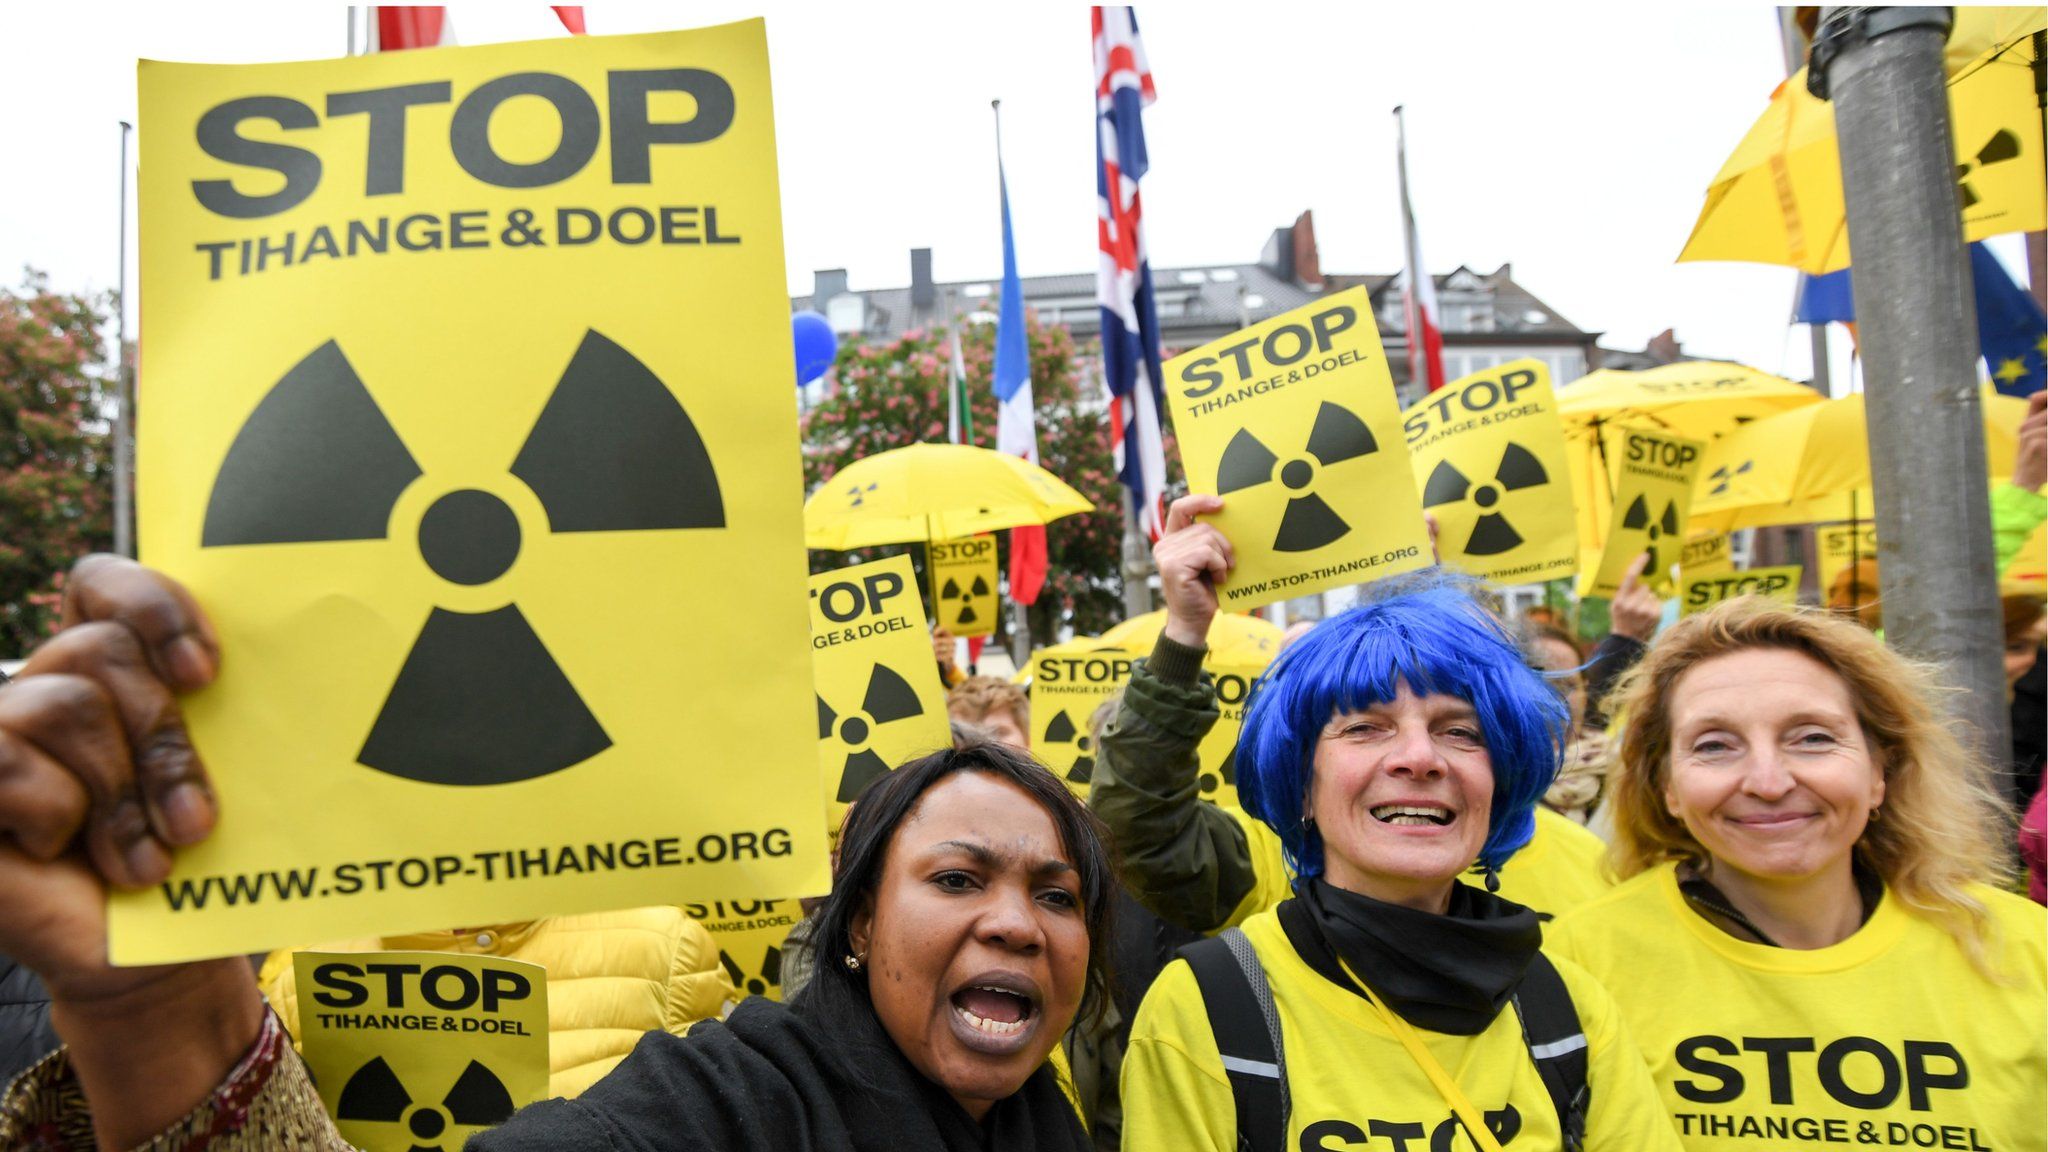 Anti-nuclear protesters hold banners and placards outside the city hall on May 10, 2018 in Aachen, western Germany.